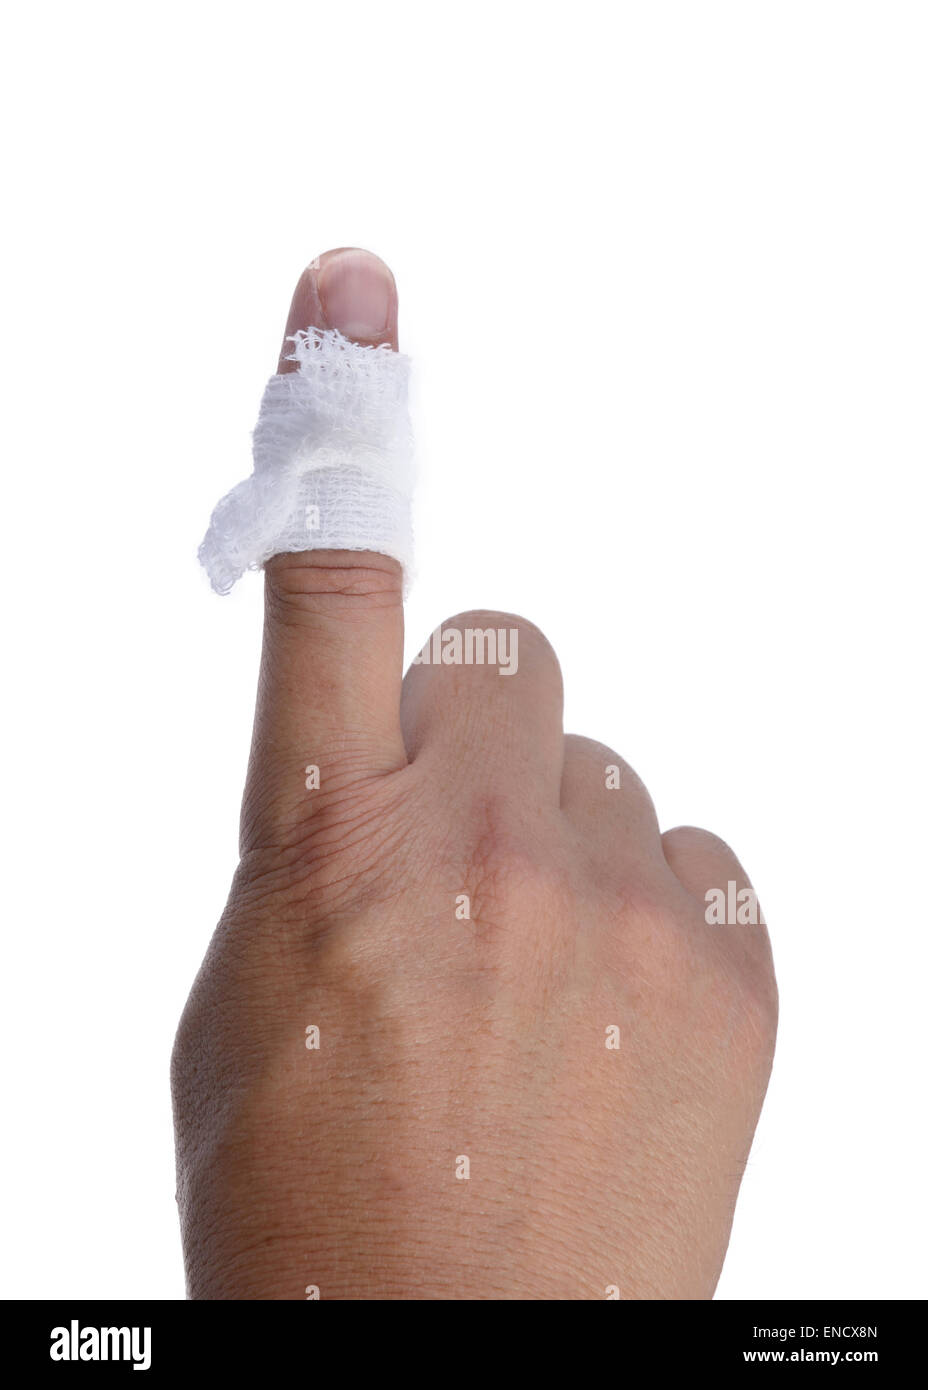 Finger with a bandage wrapped around the injury on a white background. Stock Photo